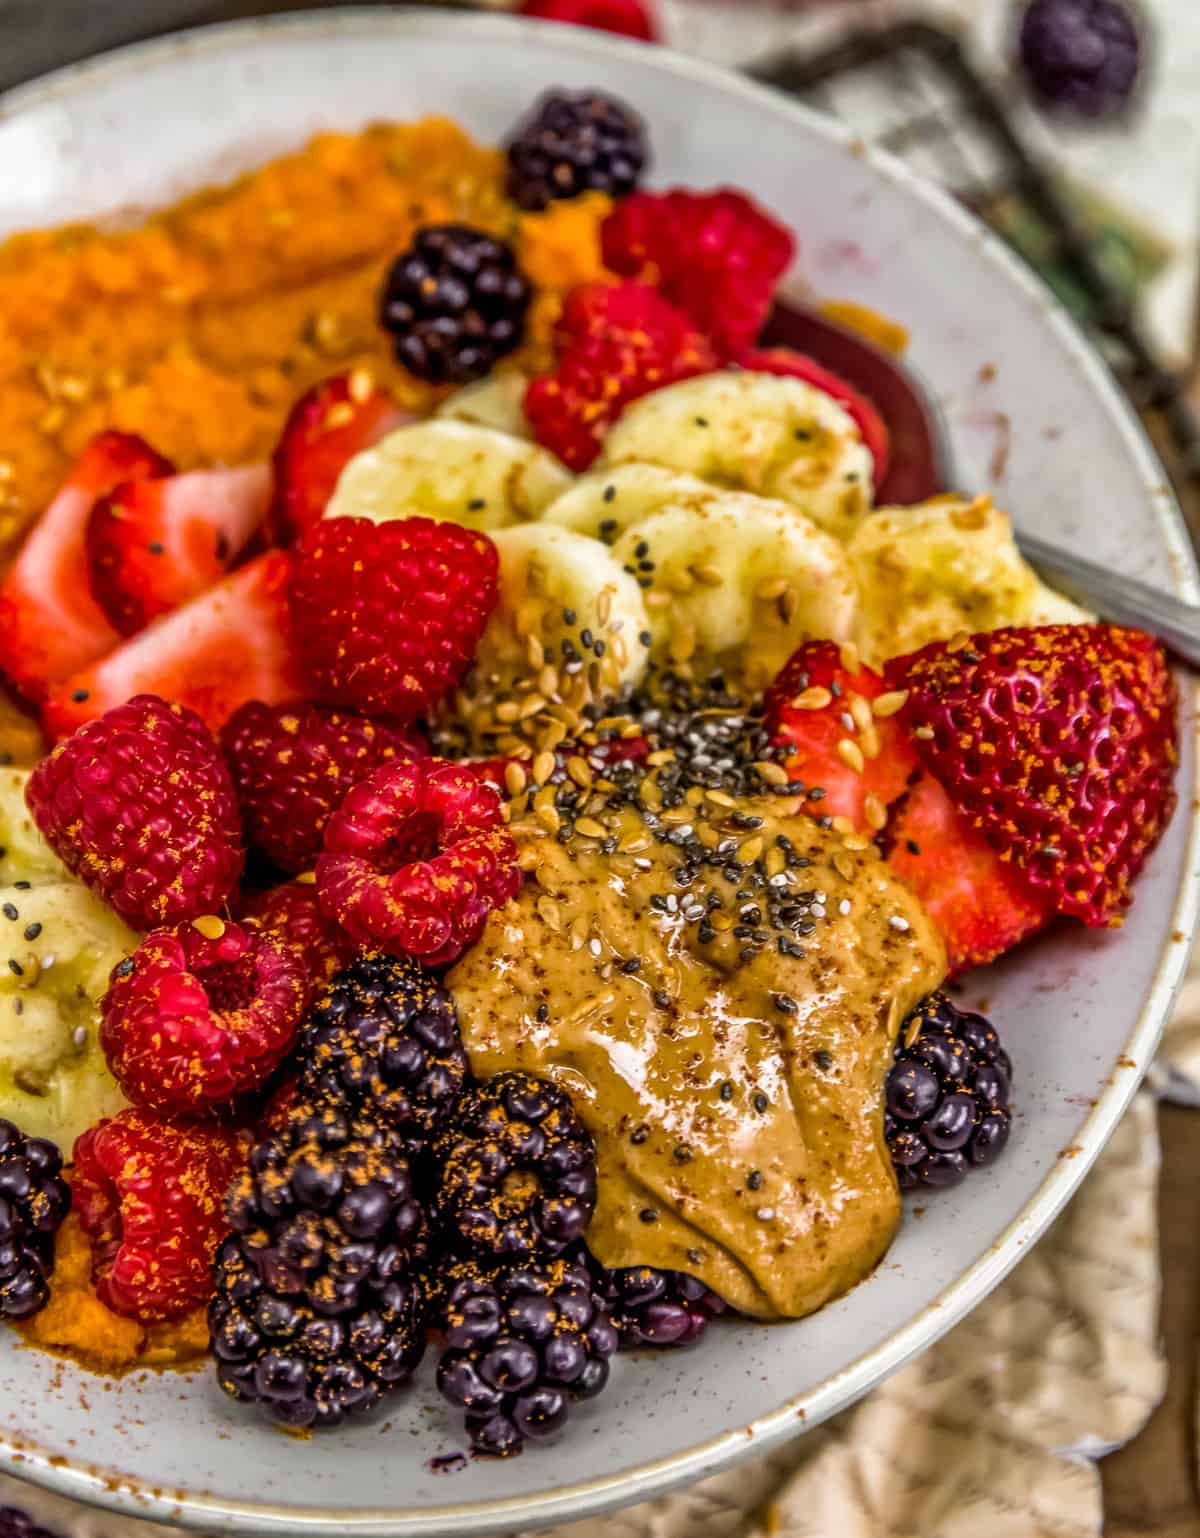 Close up of Peanut Butter and Berries Bowl